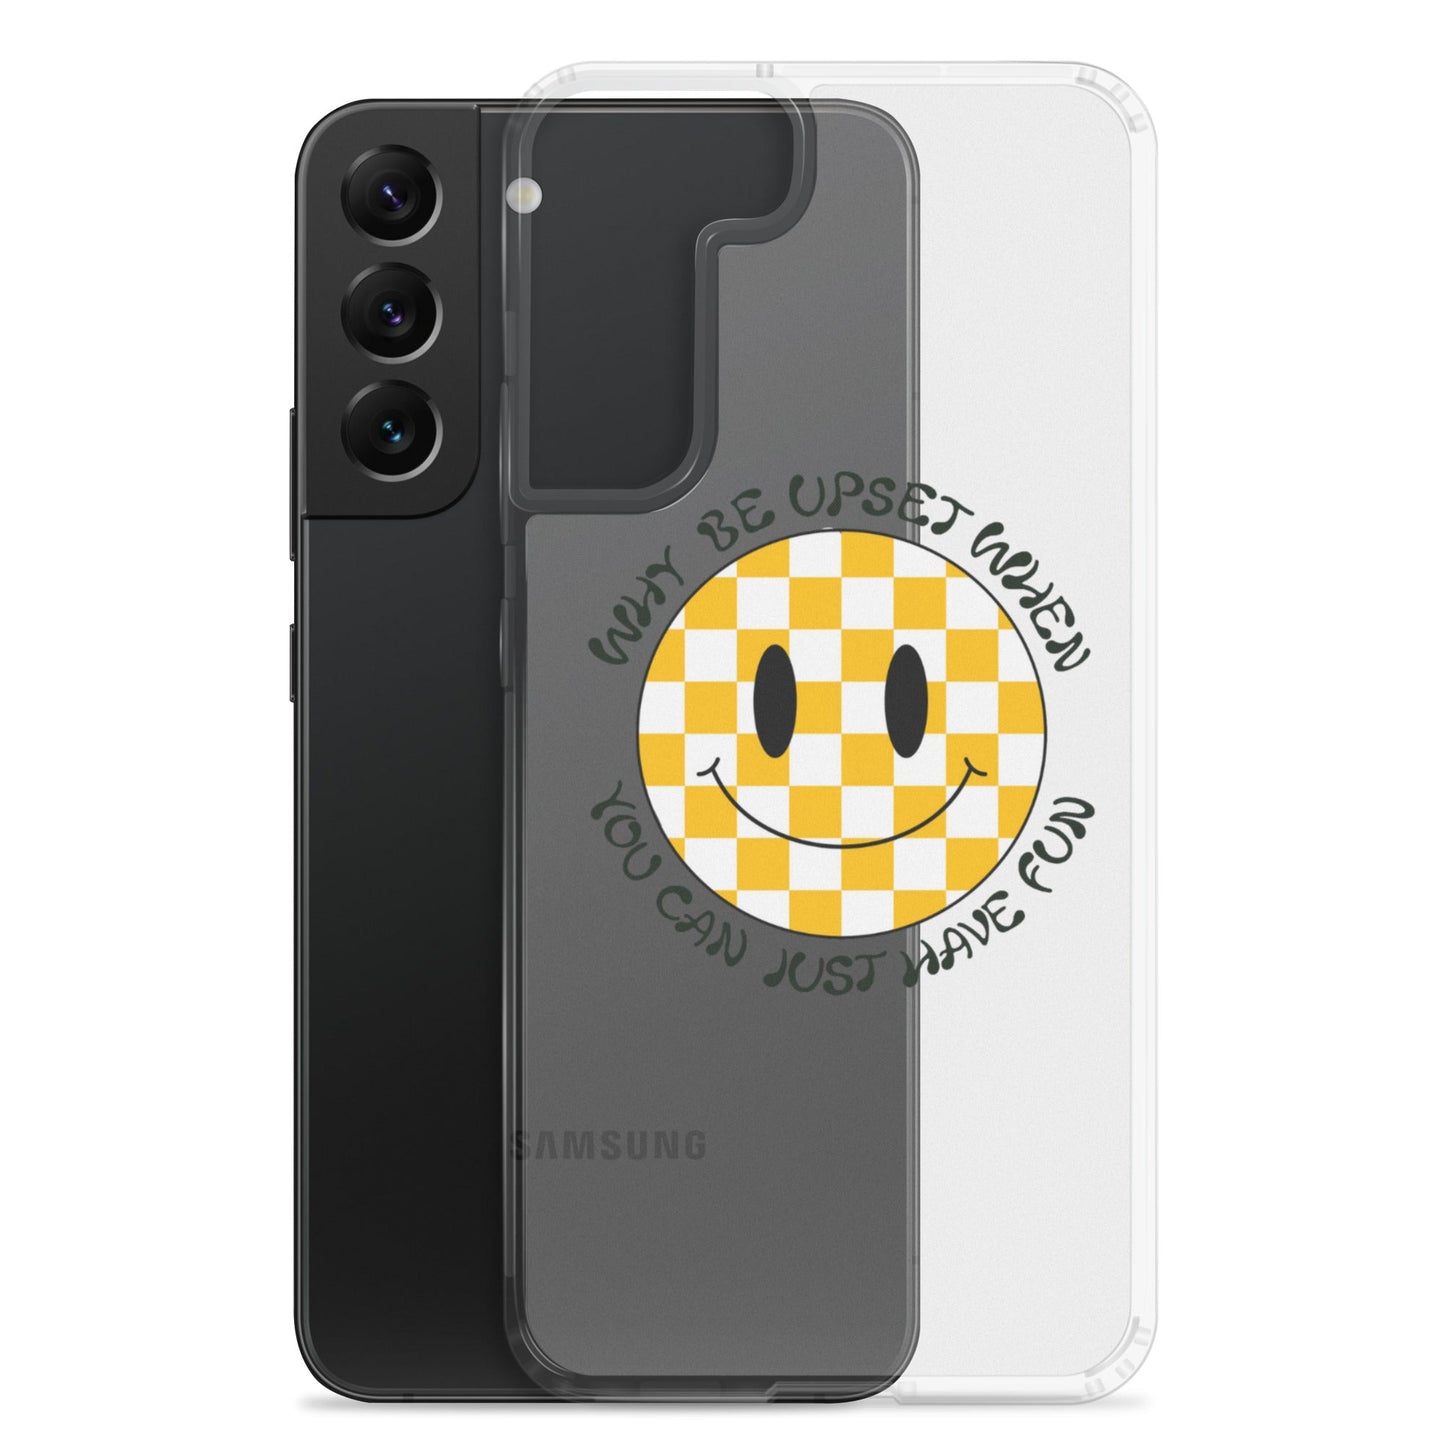 "Just Have Fun" Android Phone Case - twogirls1formula